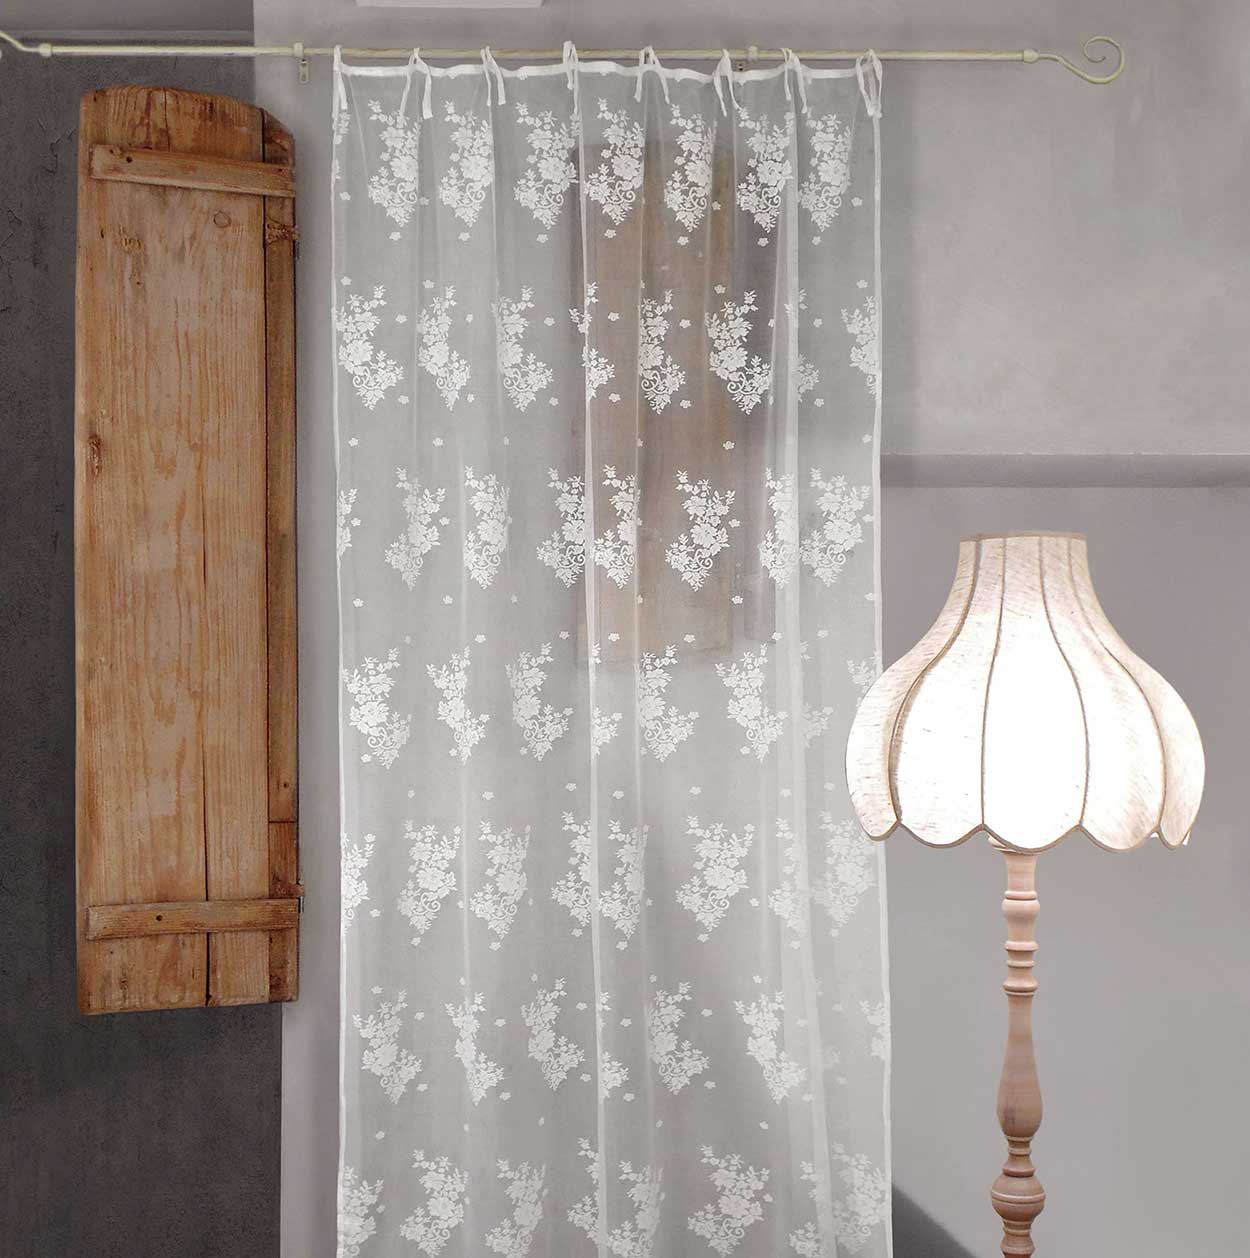 Shabby Chic Polyester-Spitzenvorhang 140 x 290 Poly-Sunset Collection Farbe Weiß